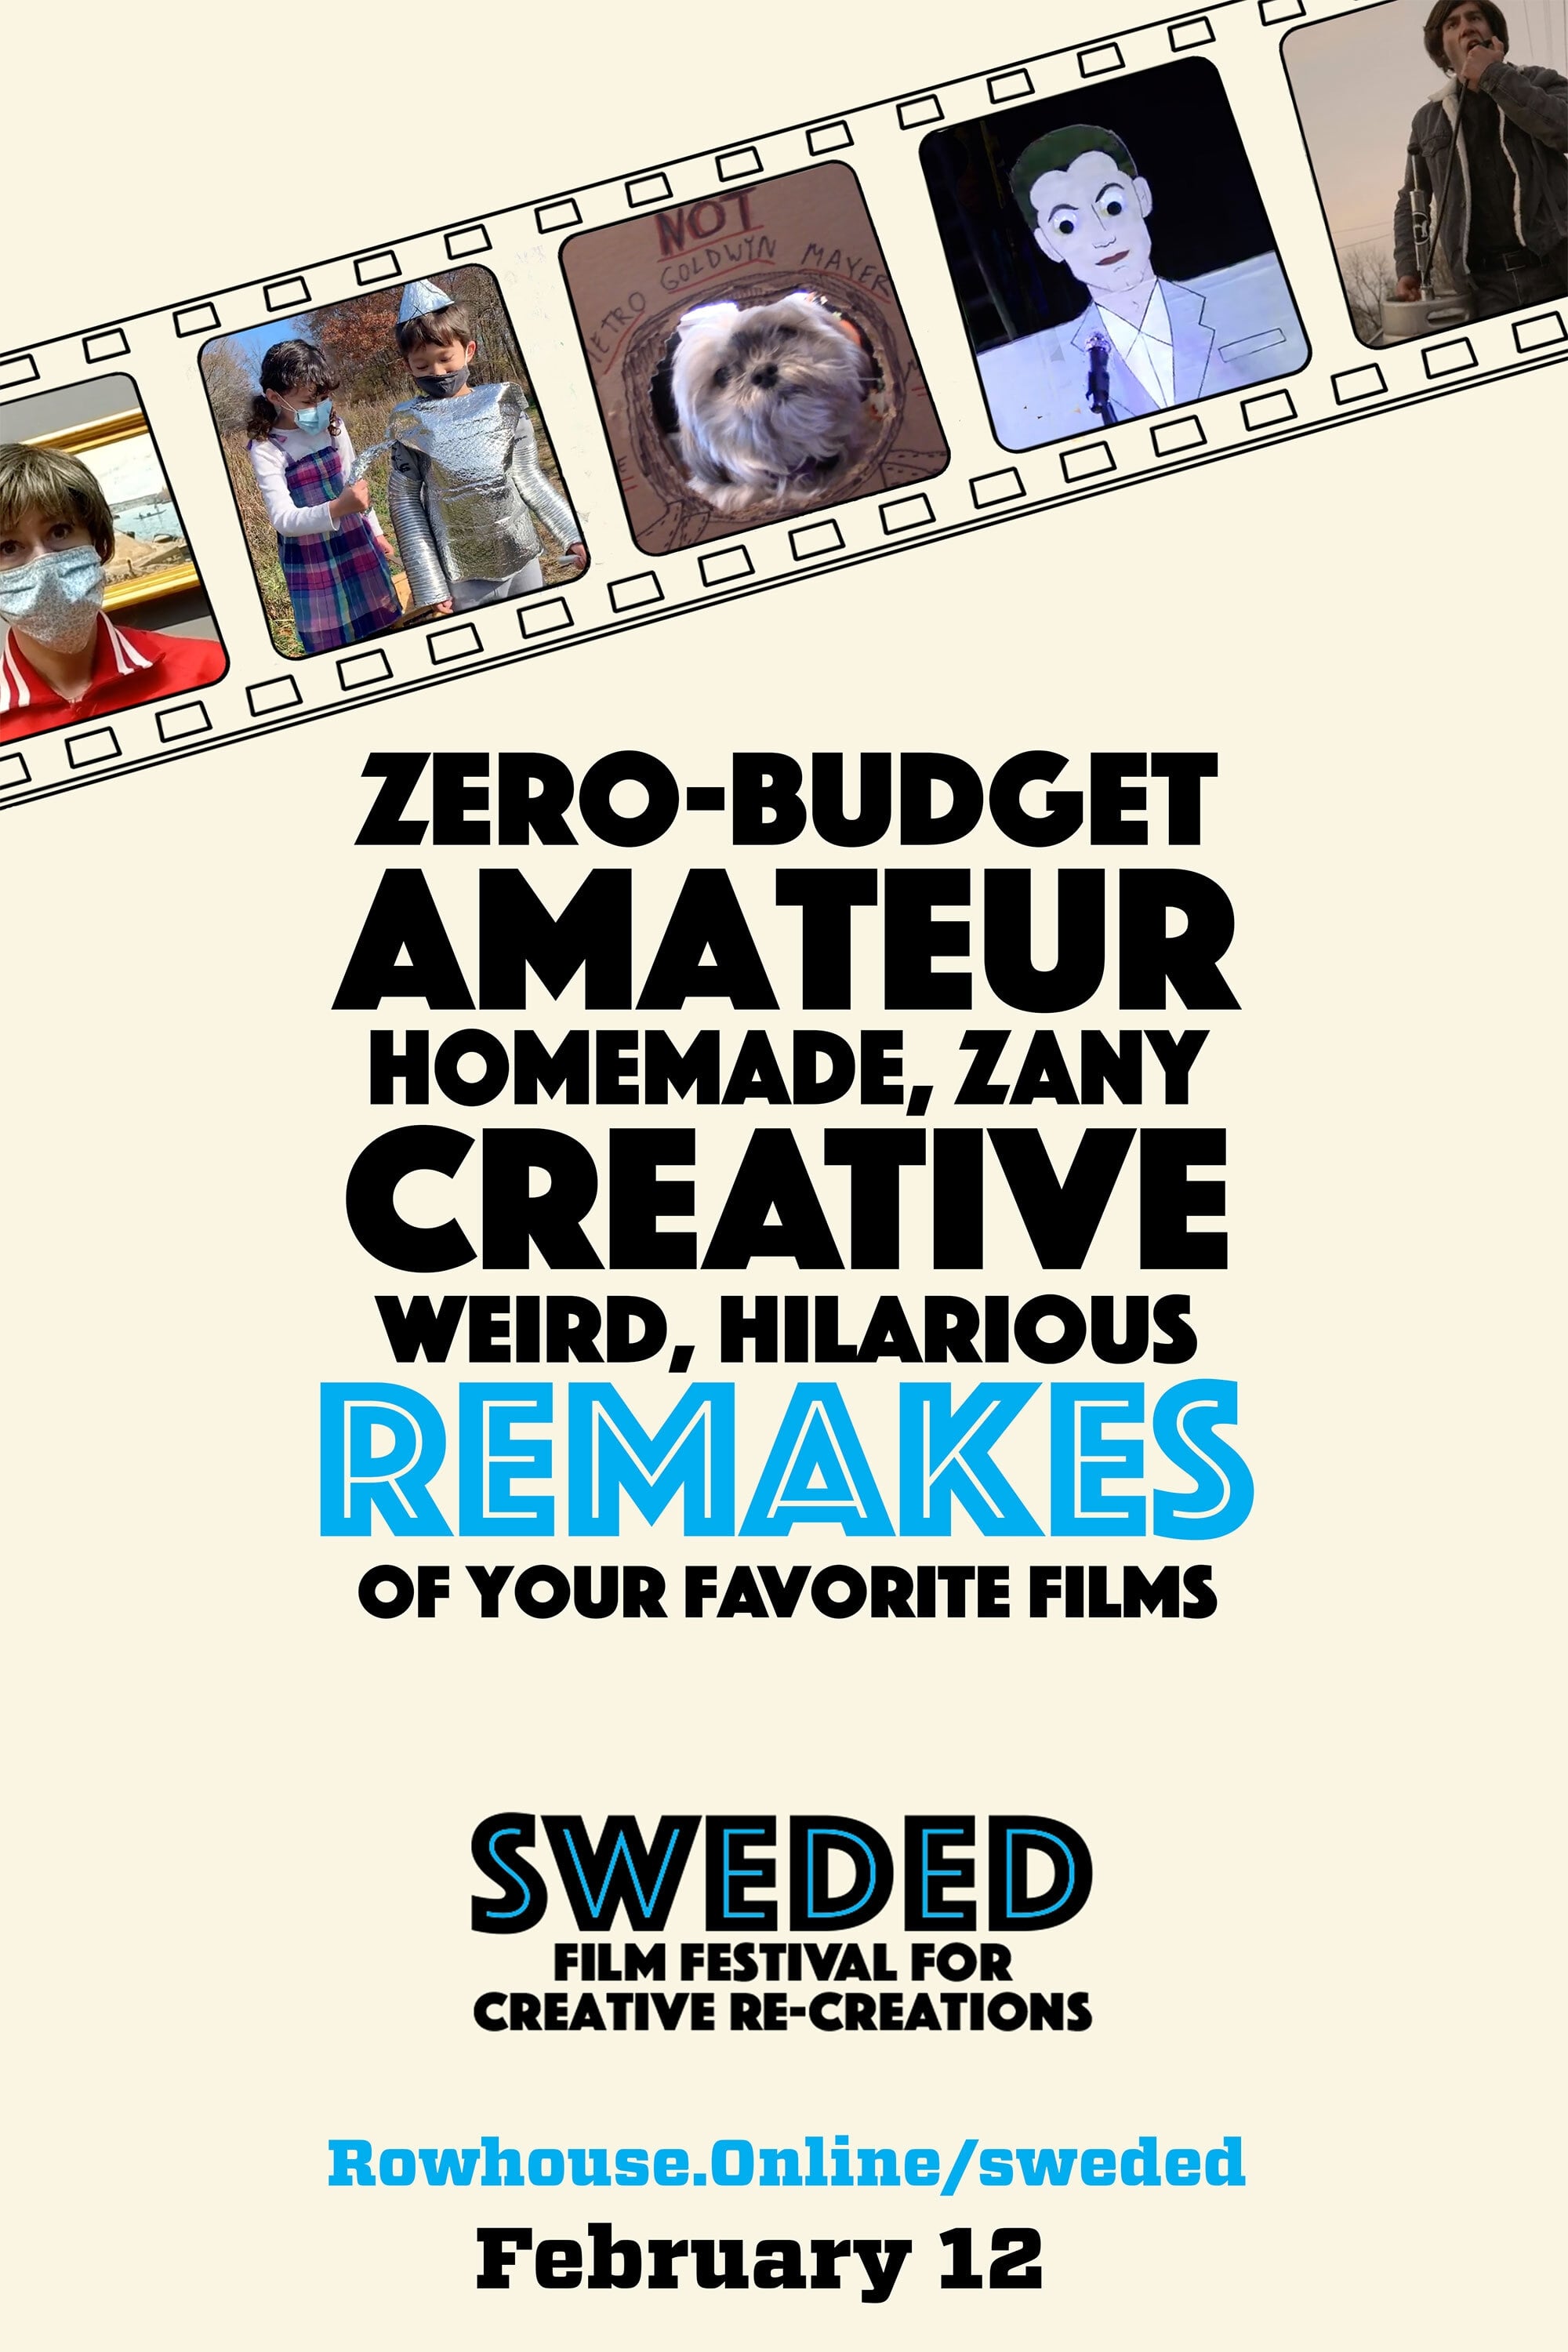 Sweded Film Festival for Creative Re-Creations